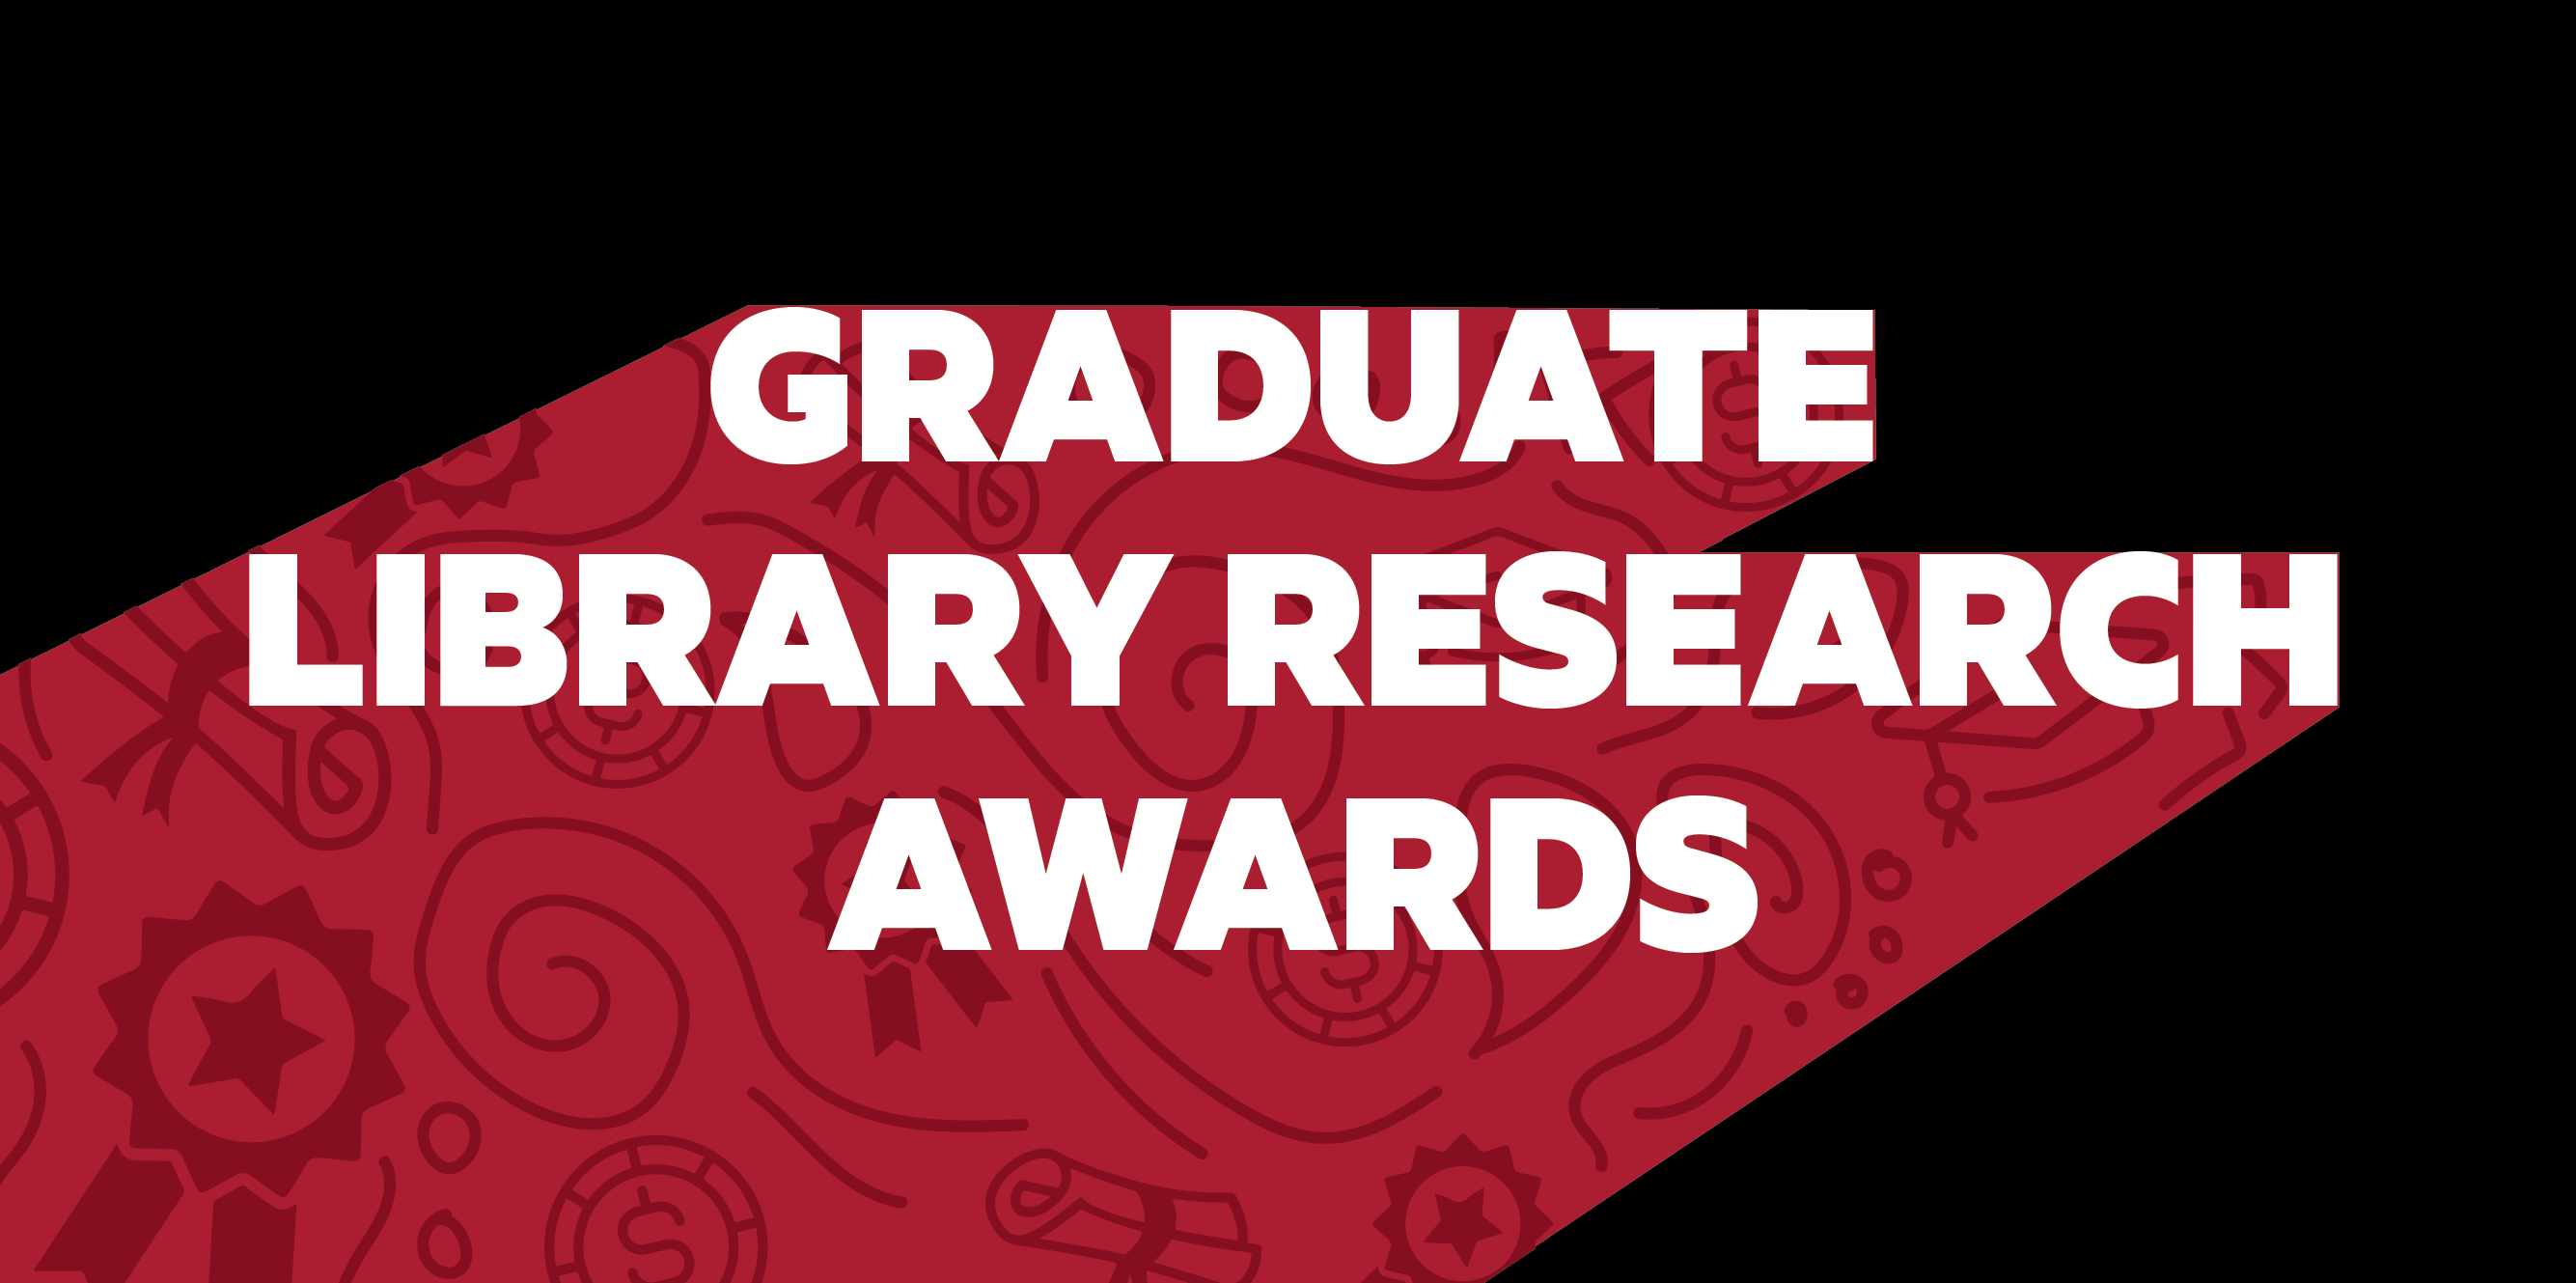 Graduate Library Research Awards